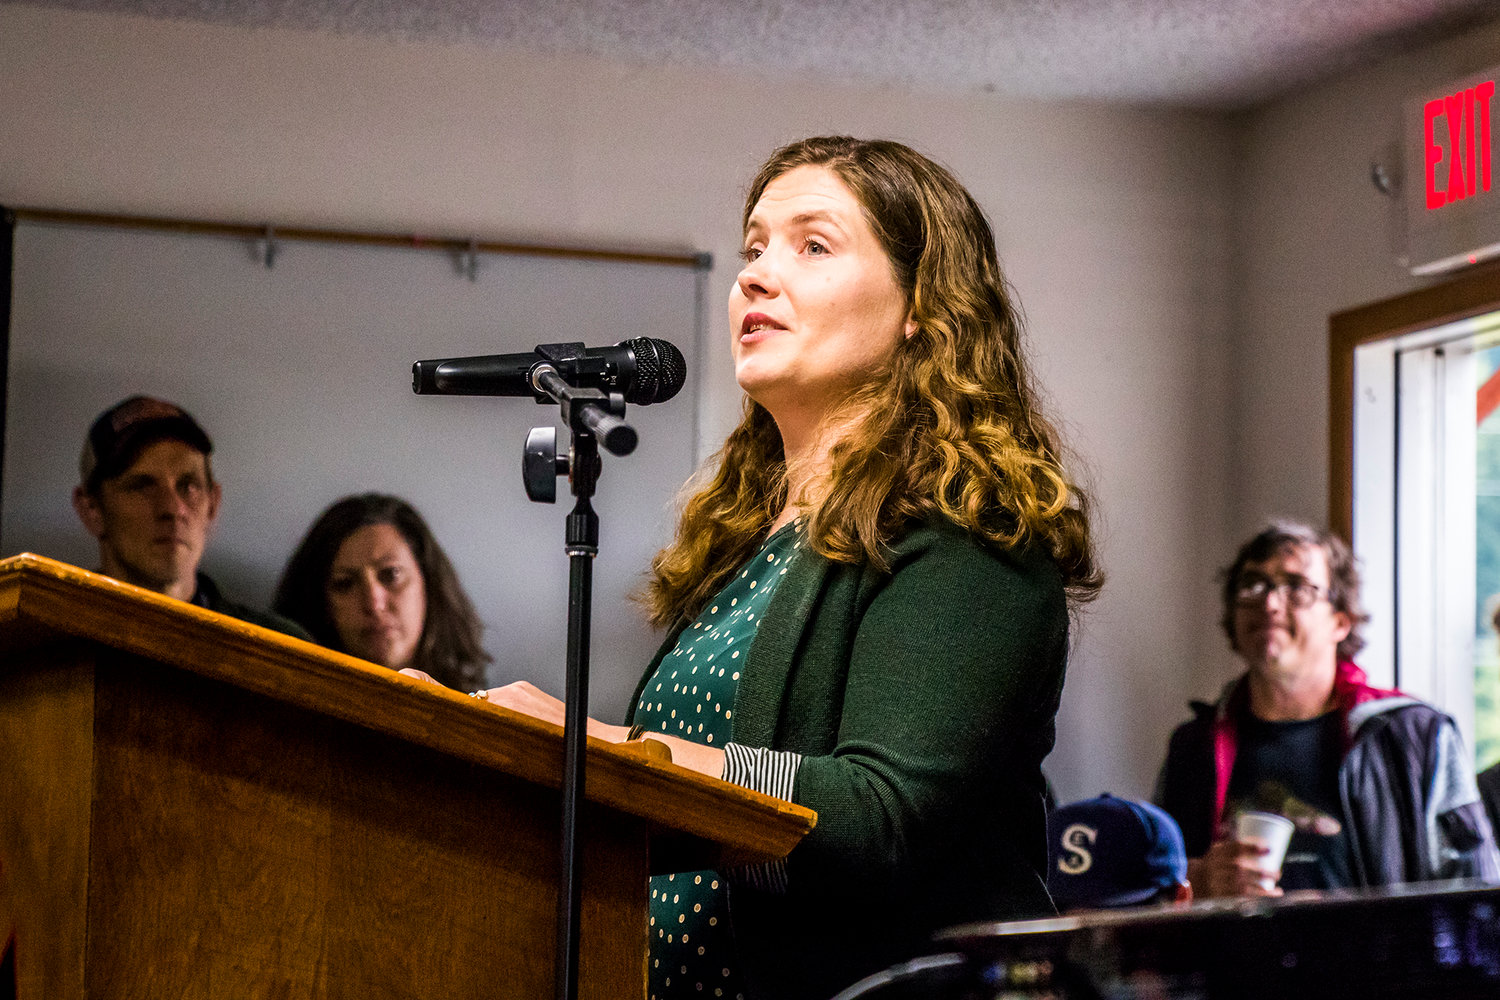 Julia DeGraw addresses a packed town hall in Randle opposing a proposed bottling plant. DeGraw helped lead opposition blocked a plant proposal in Cascade Locks, Oregon.